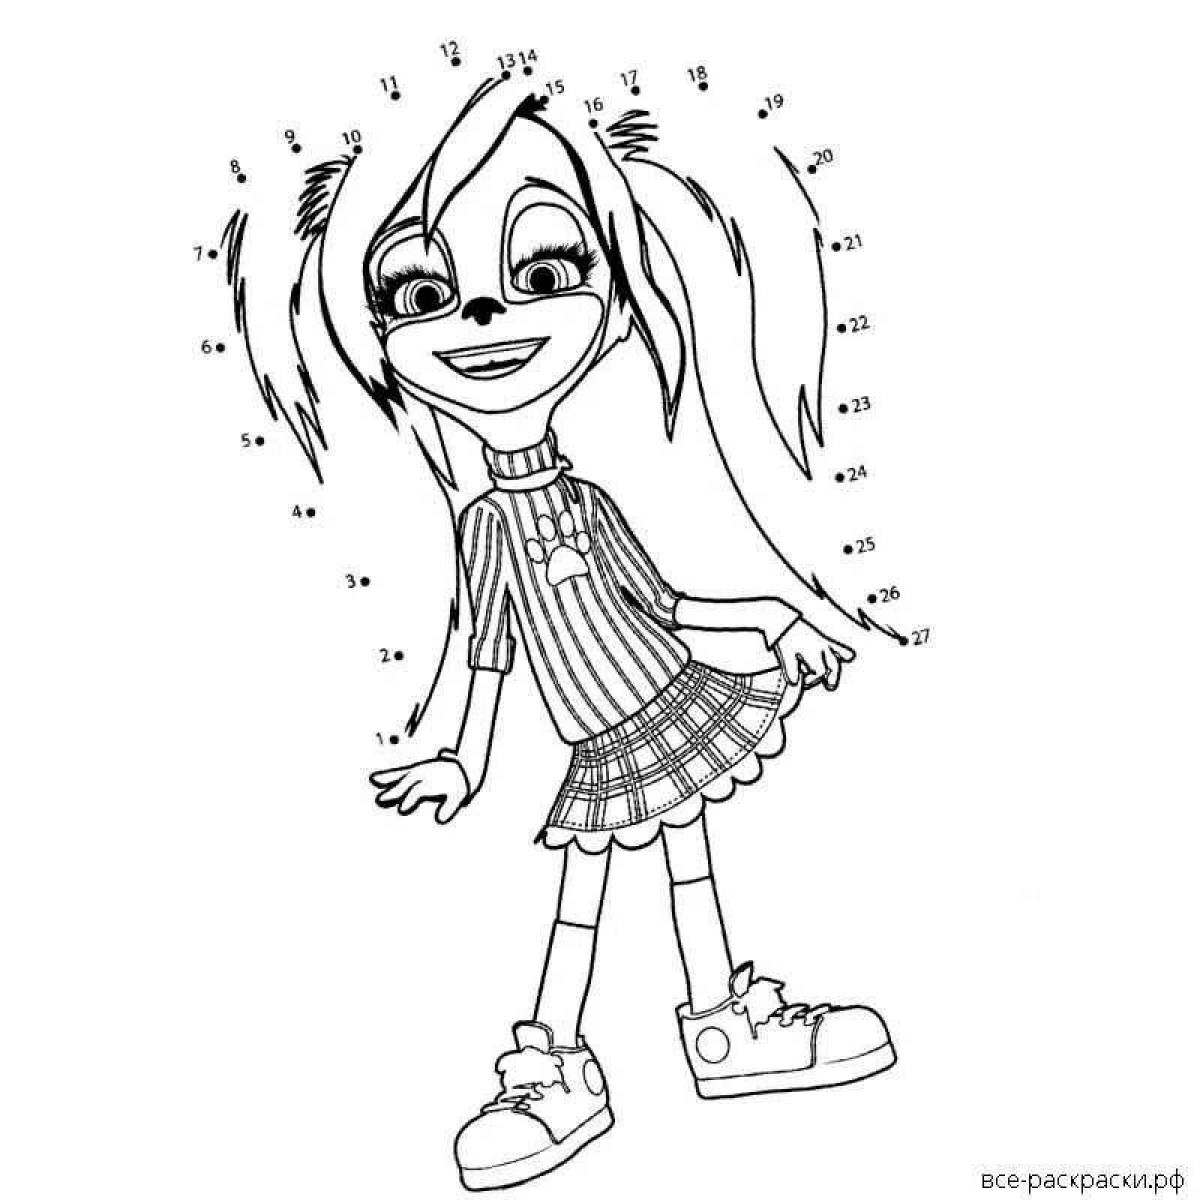 Fabulous barboskin coloring pages for girls